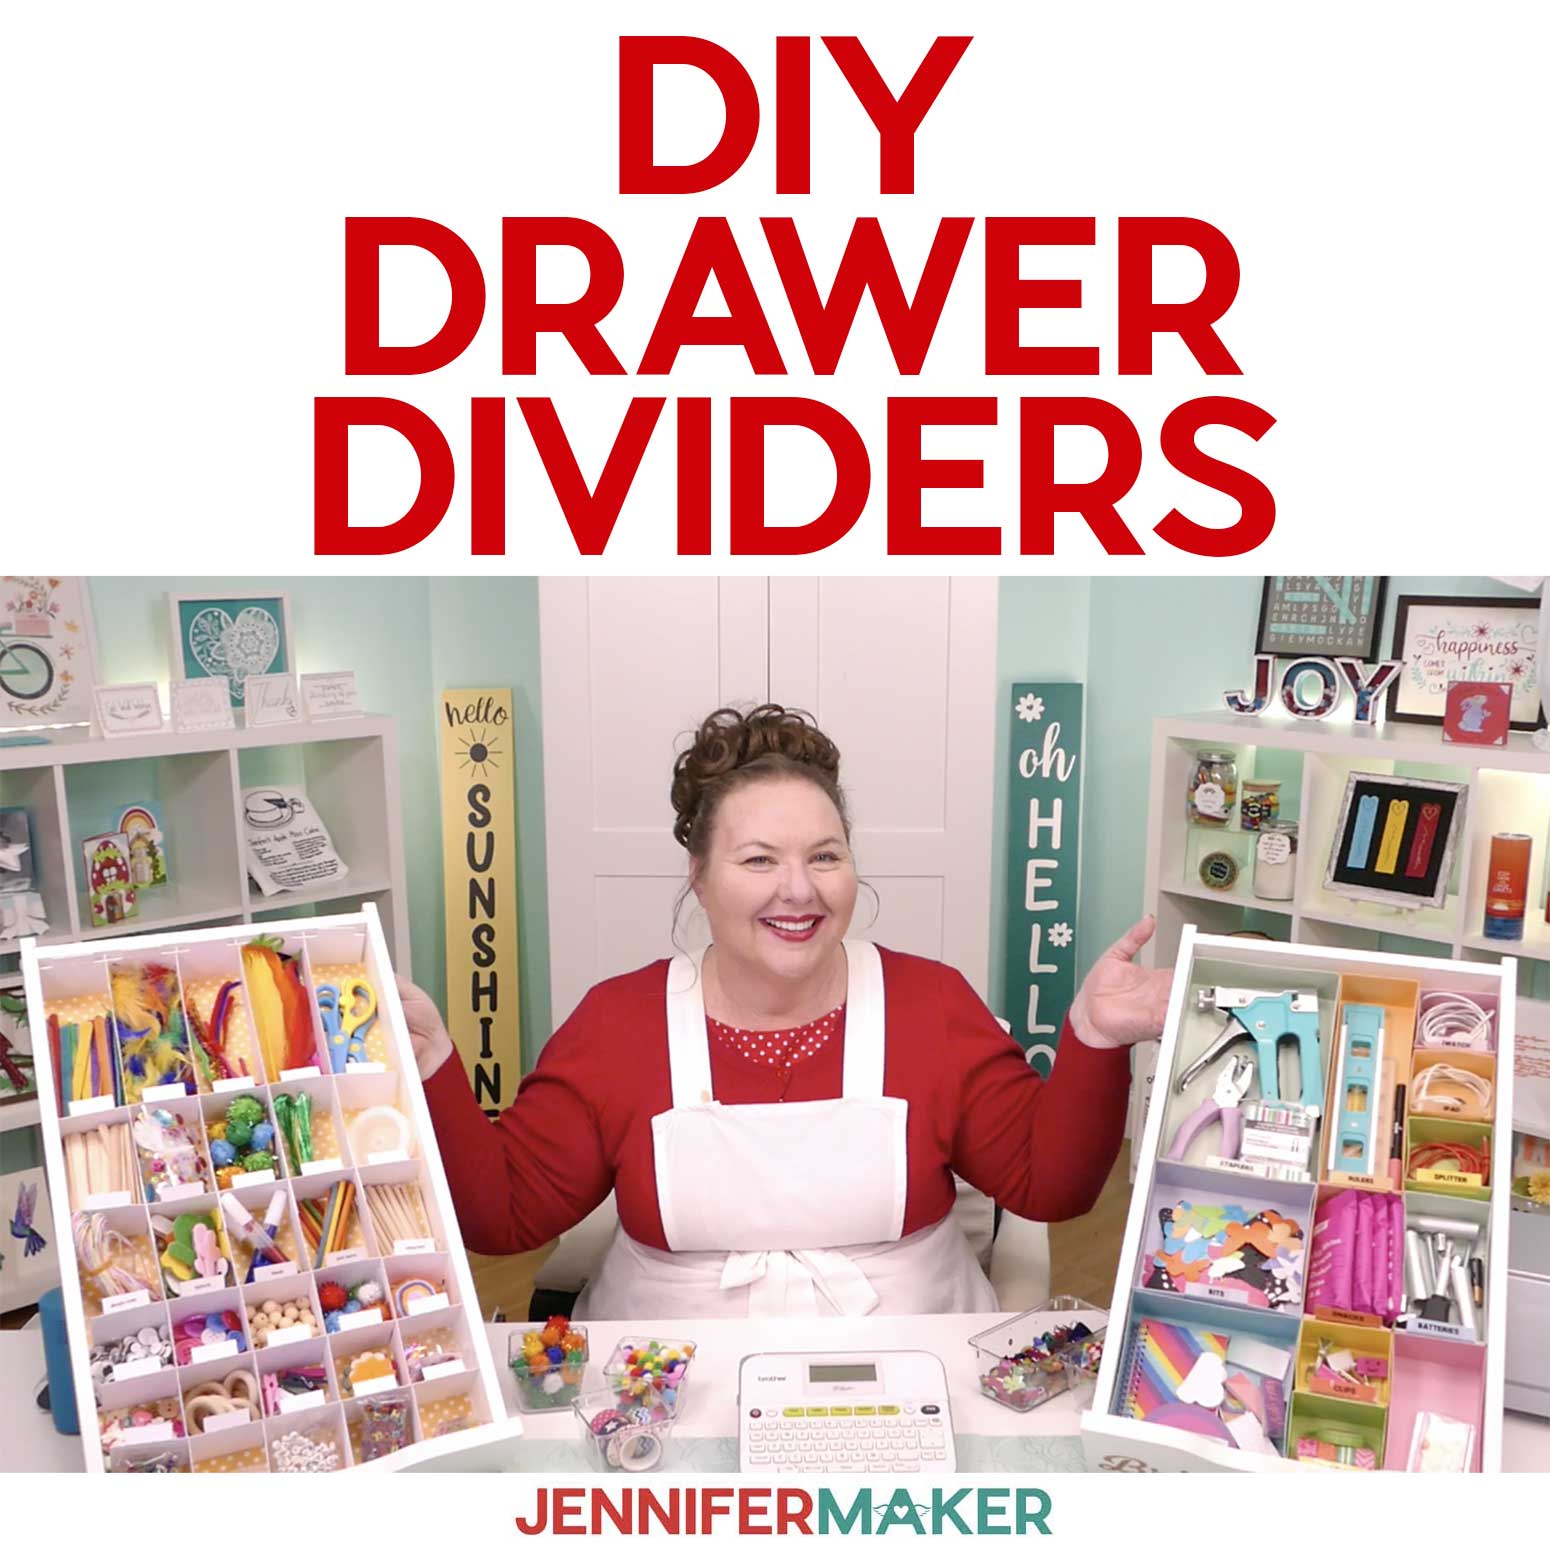 DIY Drawer Dividers: Make Your Own in Minutes!